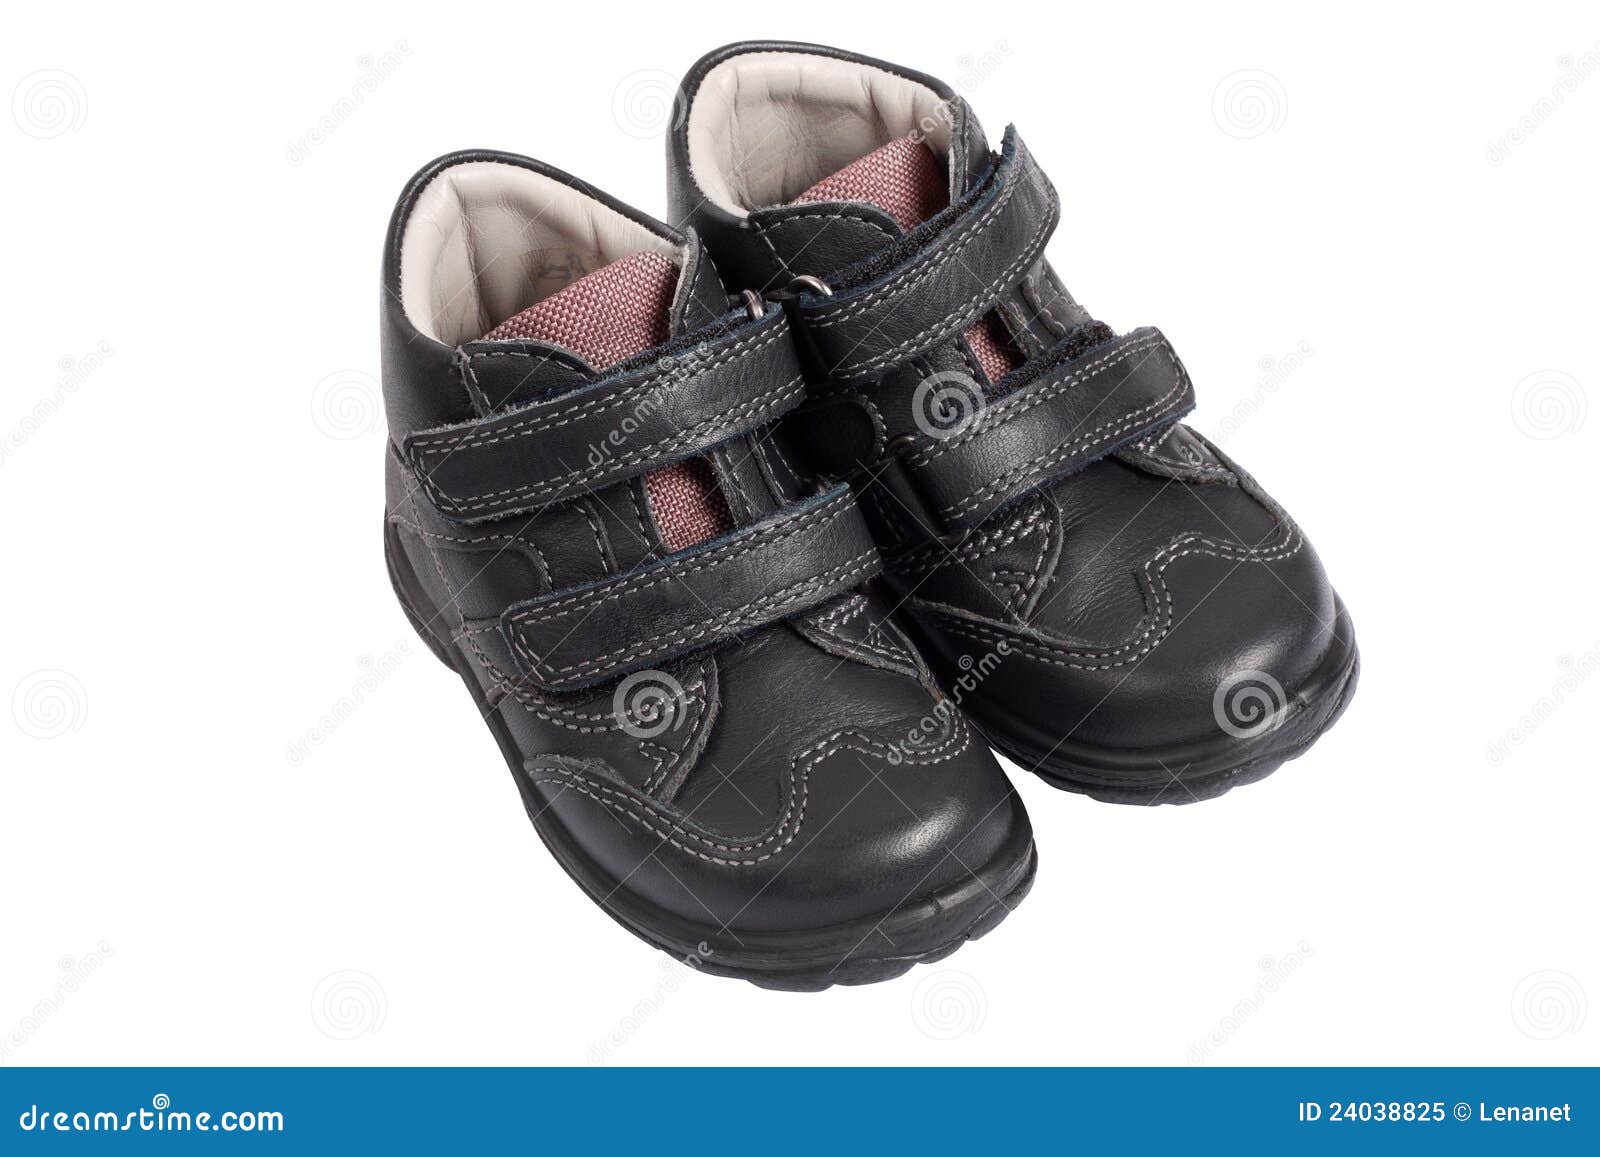 Kid S Shoes from the Black Leather Stock Image - Image of background ...